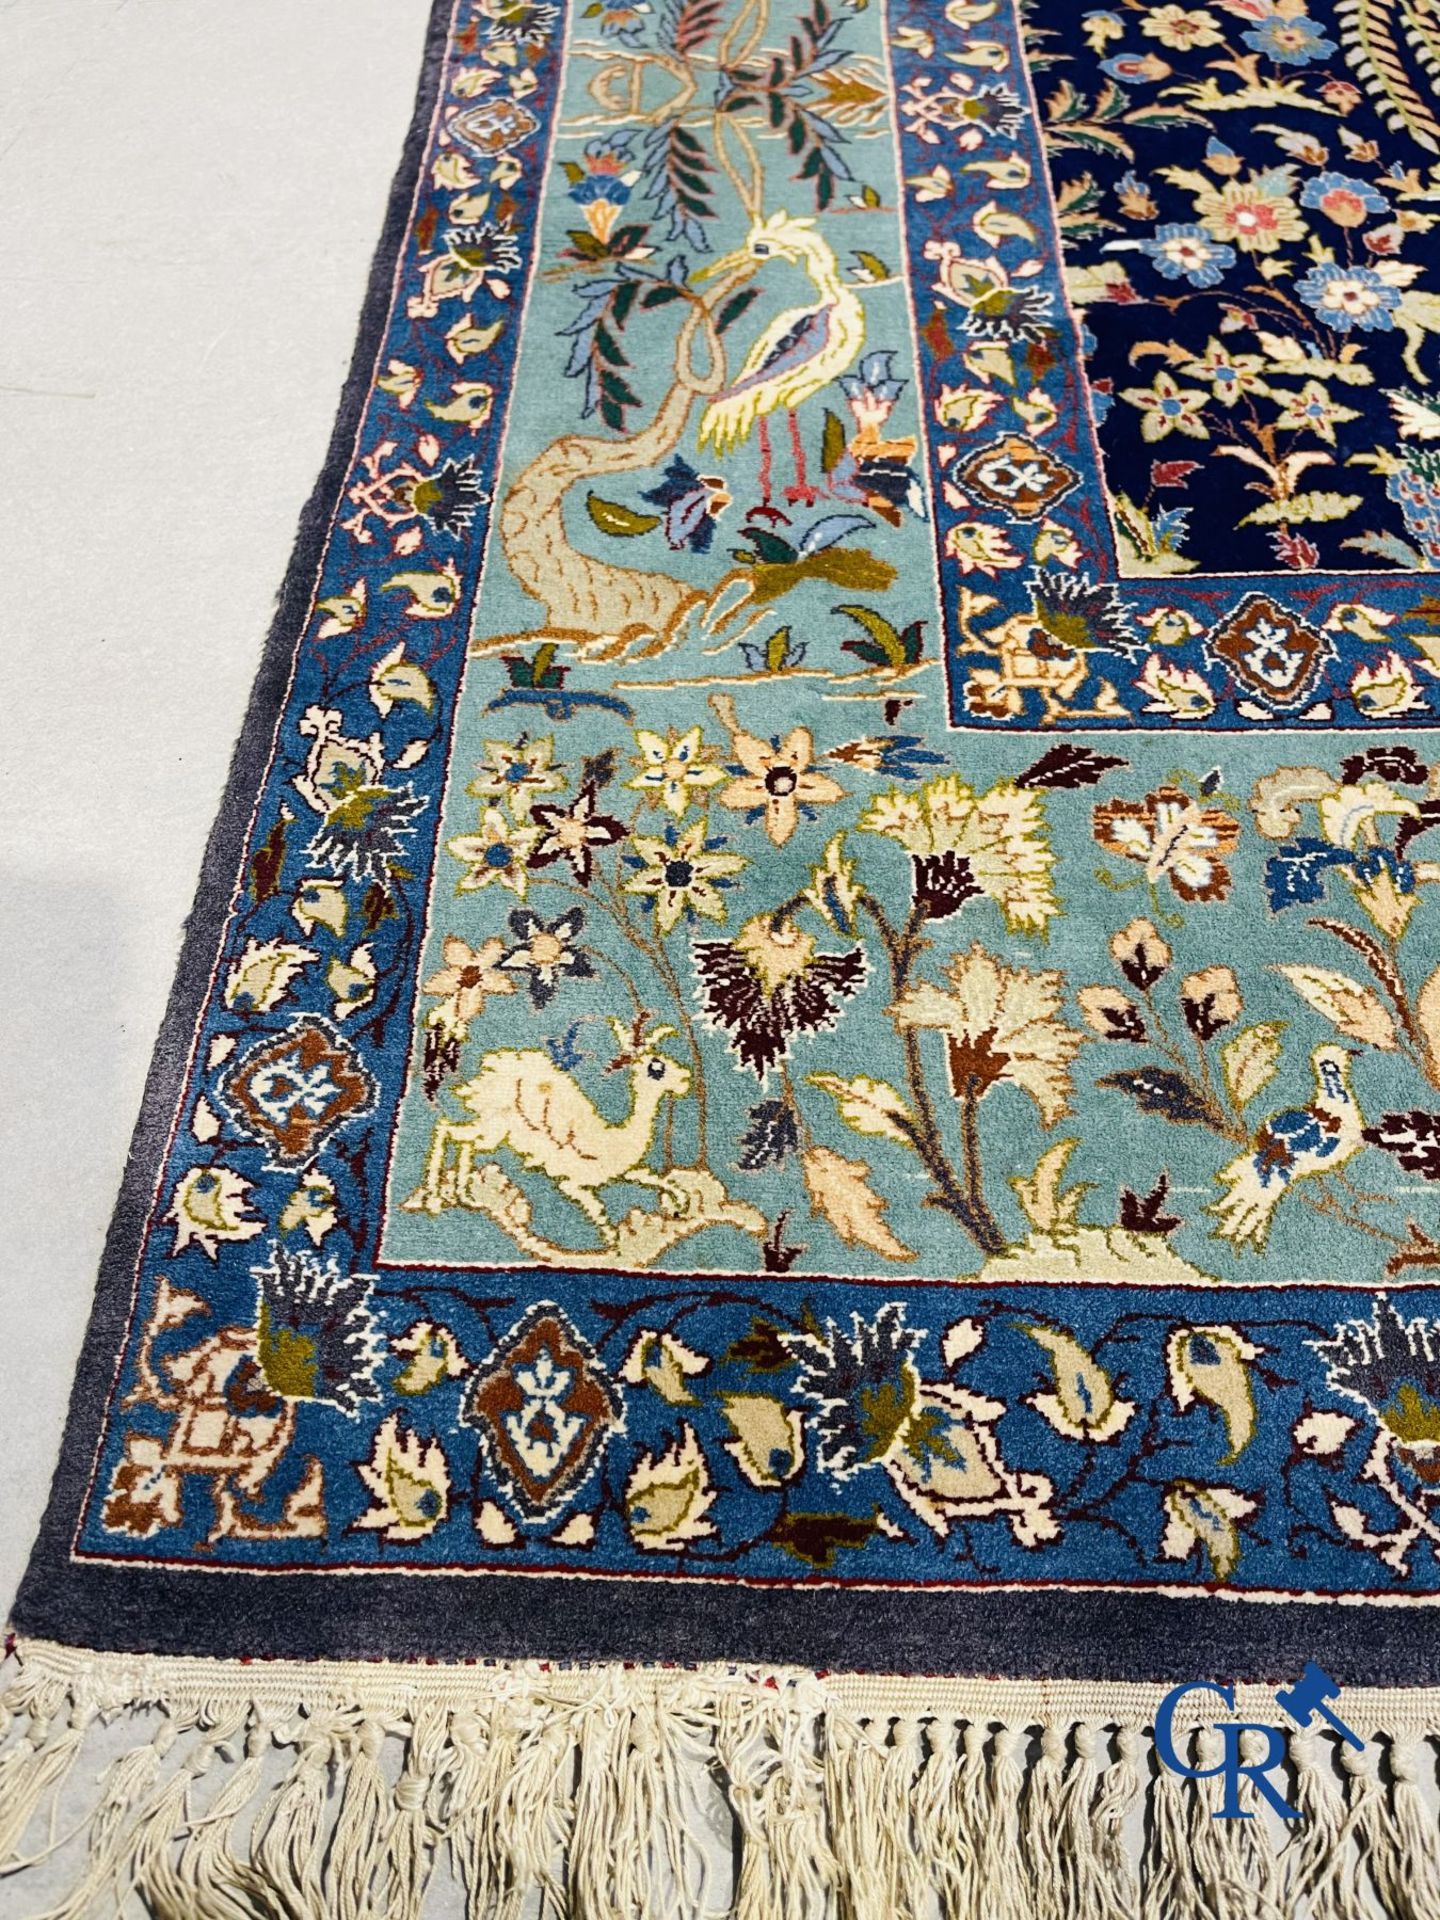 Oriental carpets: Iran. Isfahan, Persian hand-knotted carpet with a decor of animals, birds, plants  - Image 5 of 11